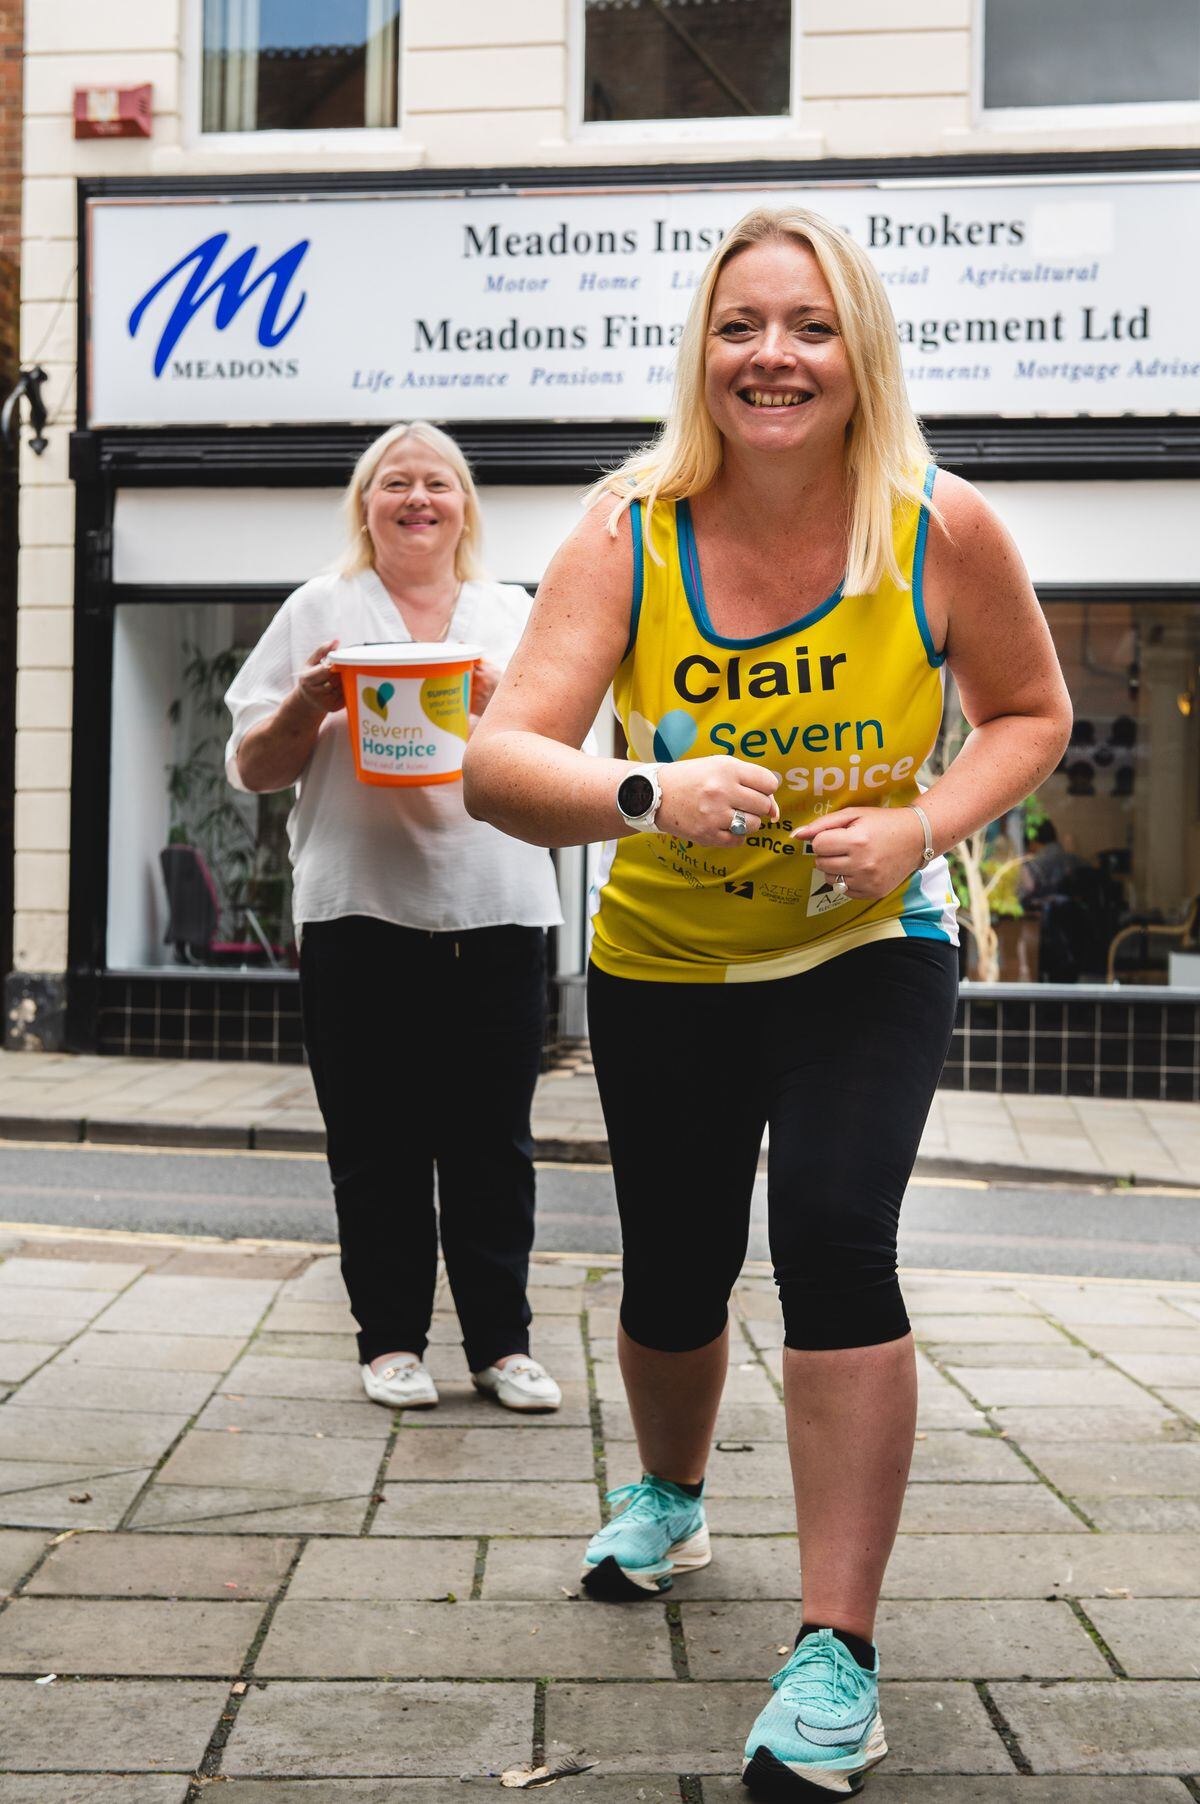 Clair all set for her marathon effort. Photo by Malcolm Hart